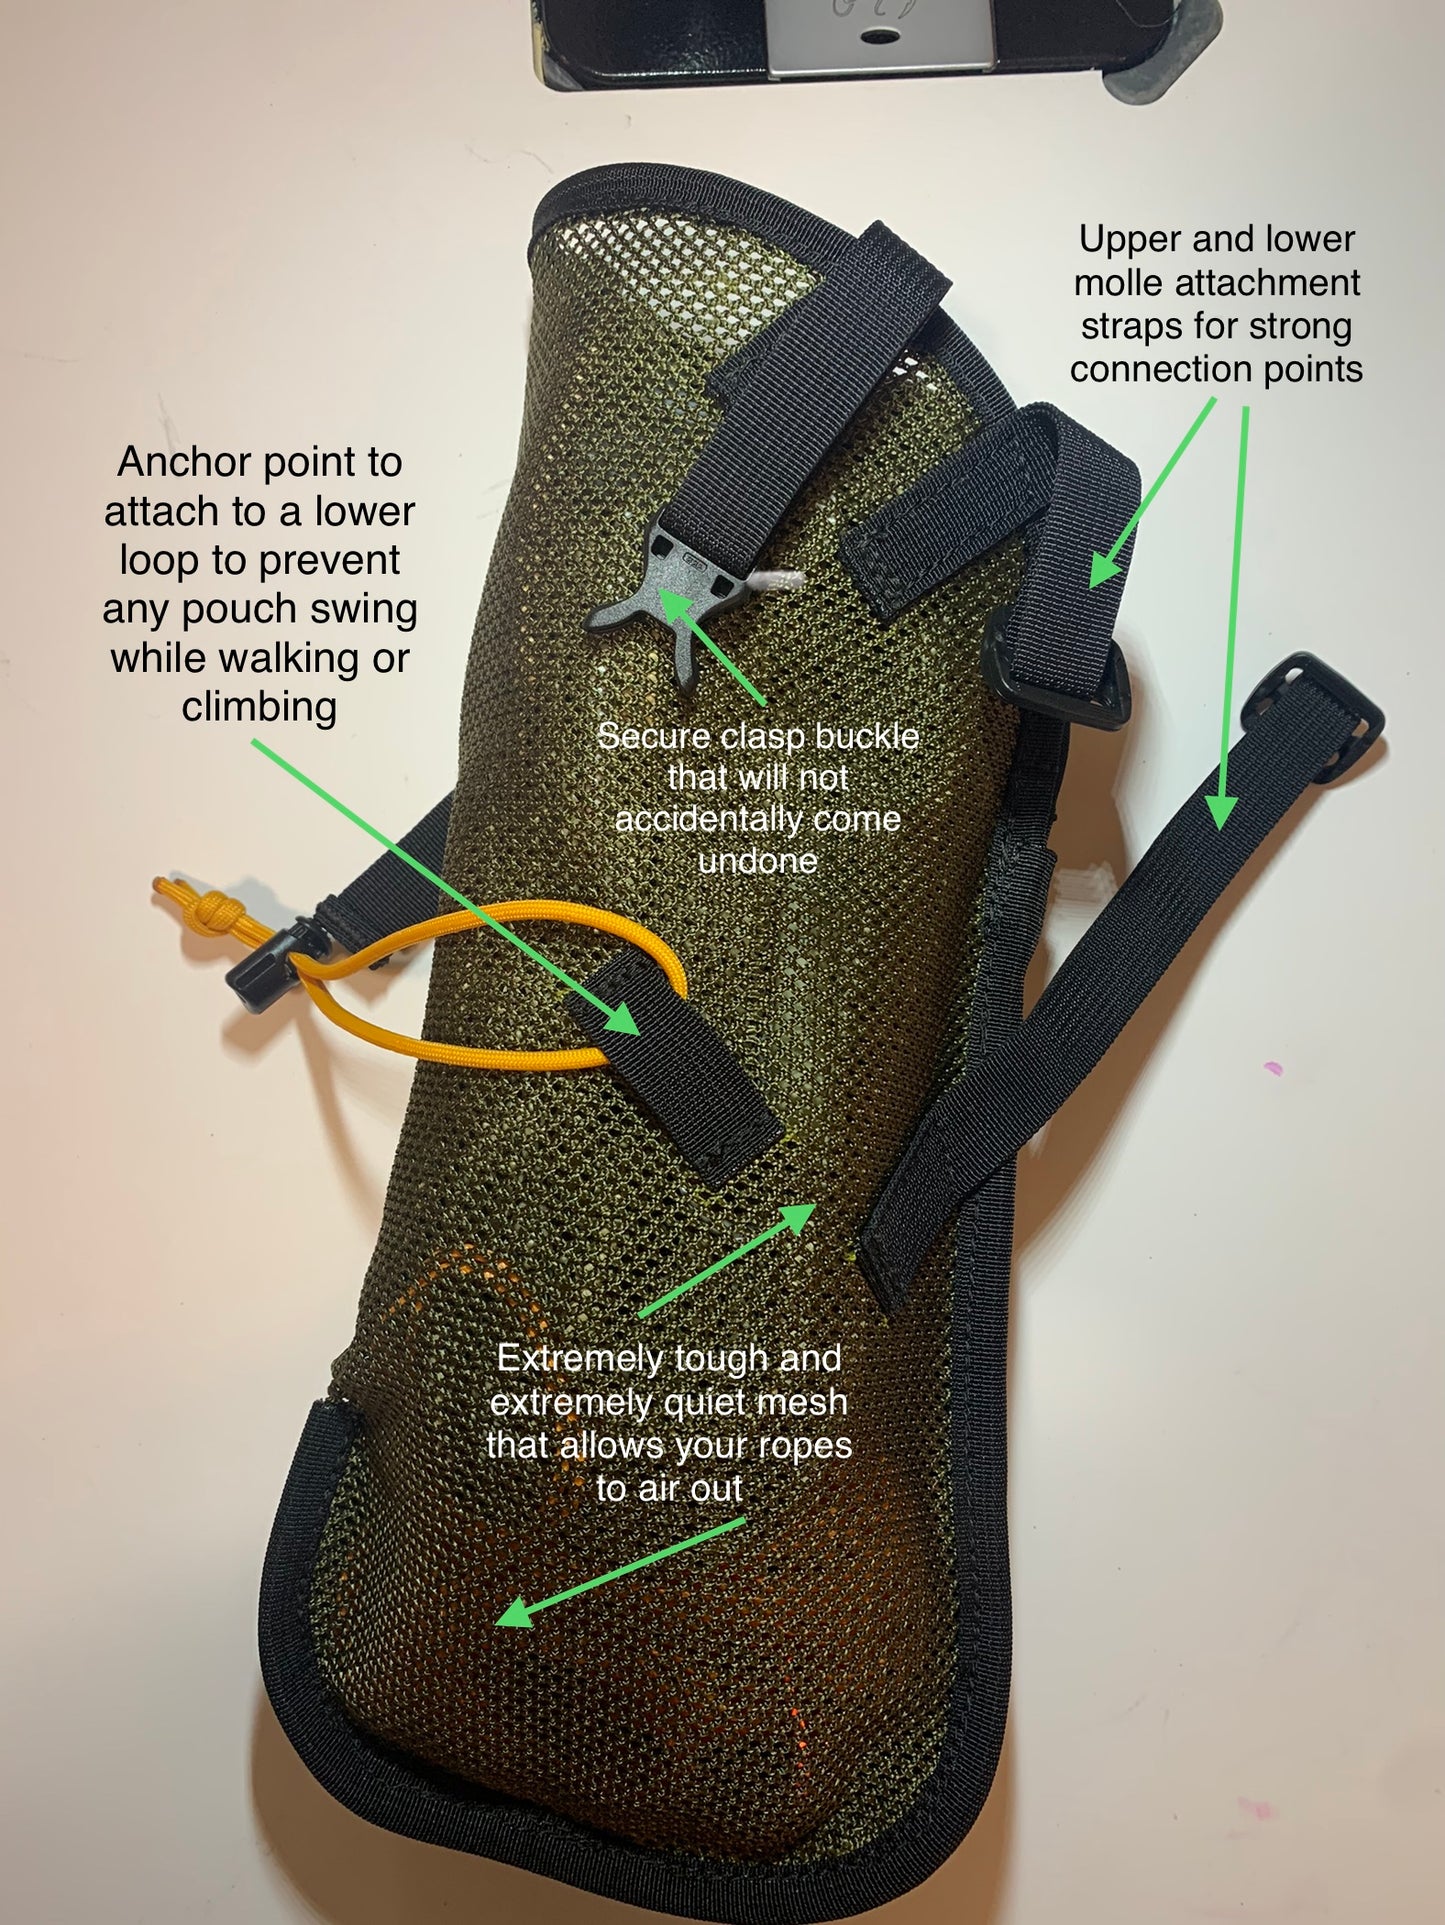 The New Legend One-Stick Ropes (OSR) Pouch 2.0